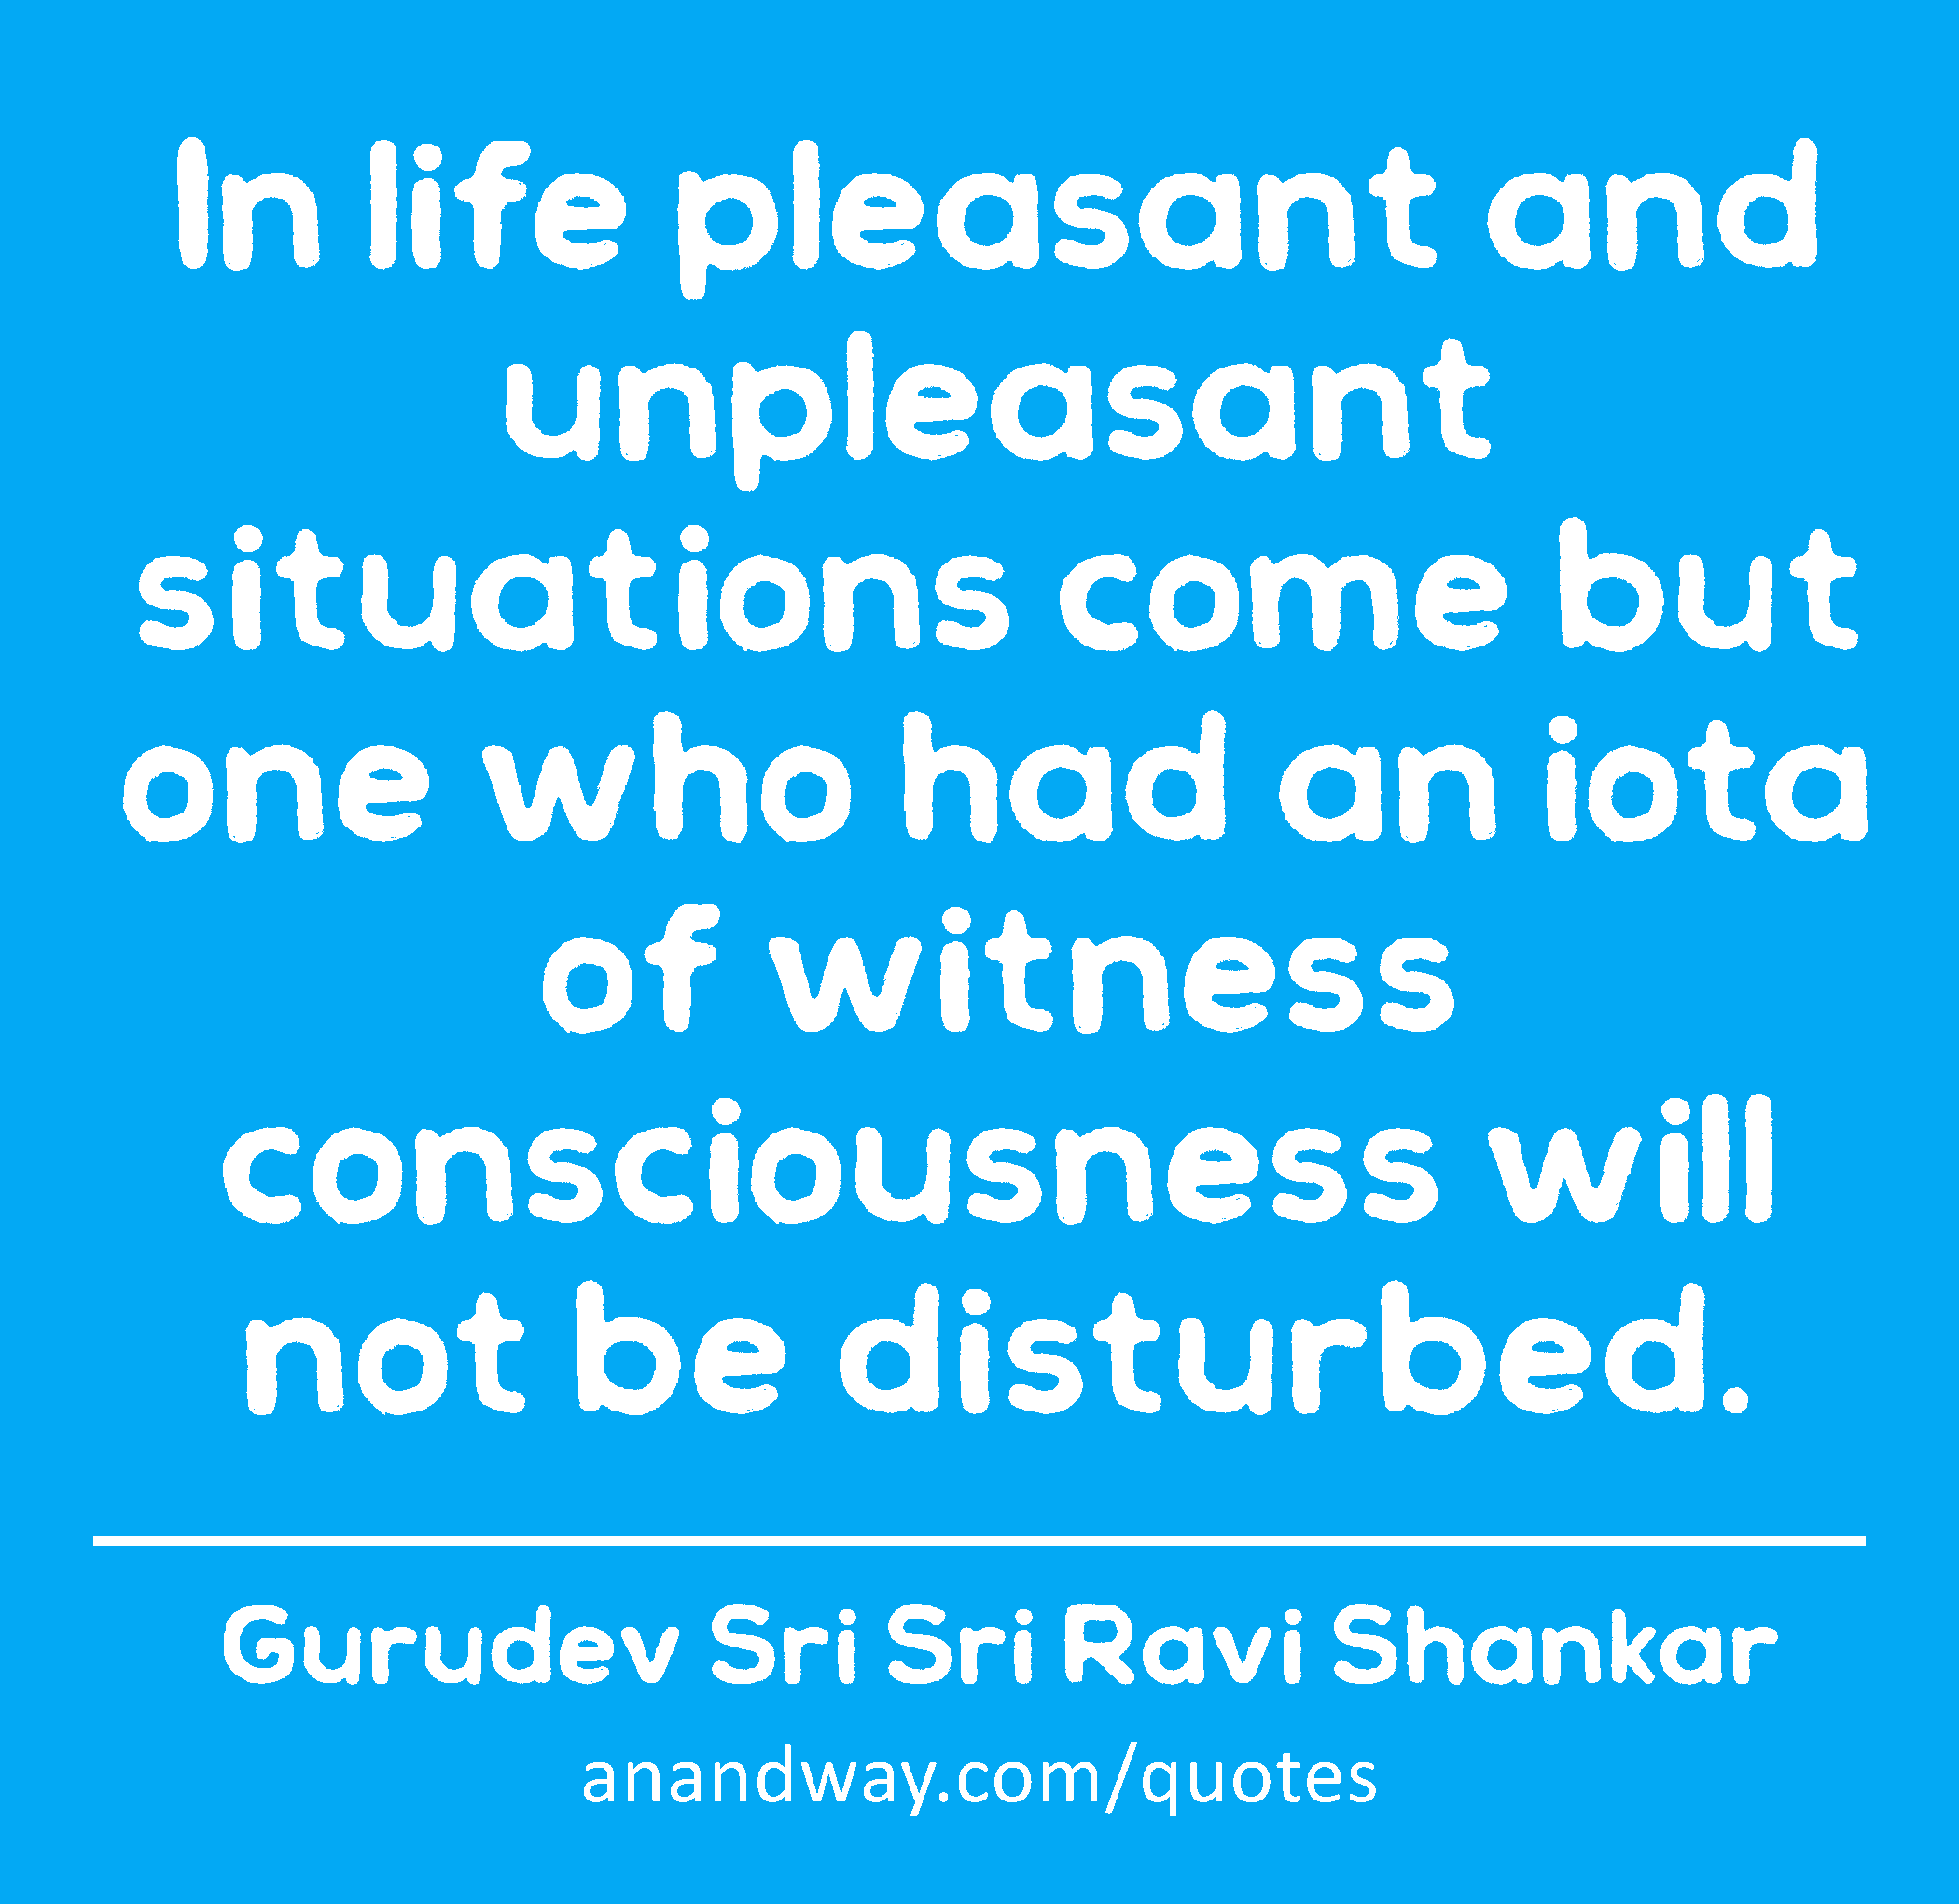 In life pleasant and unpleasant situations come but one who had an iota of witness consciousness
 -Gurudev Sri Sri Ravi Shankar